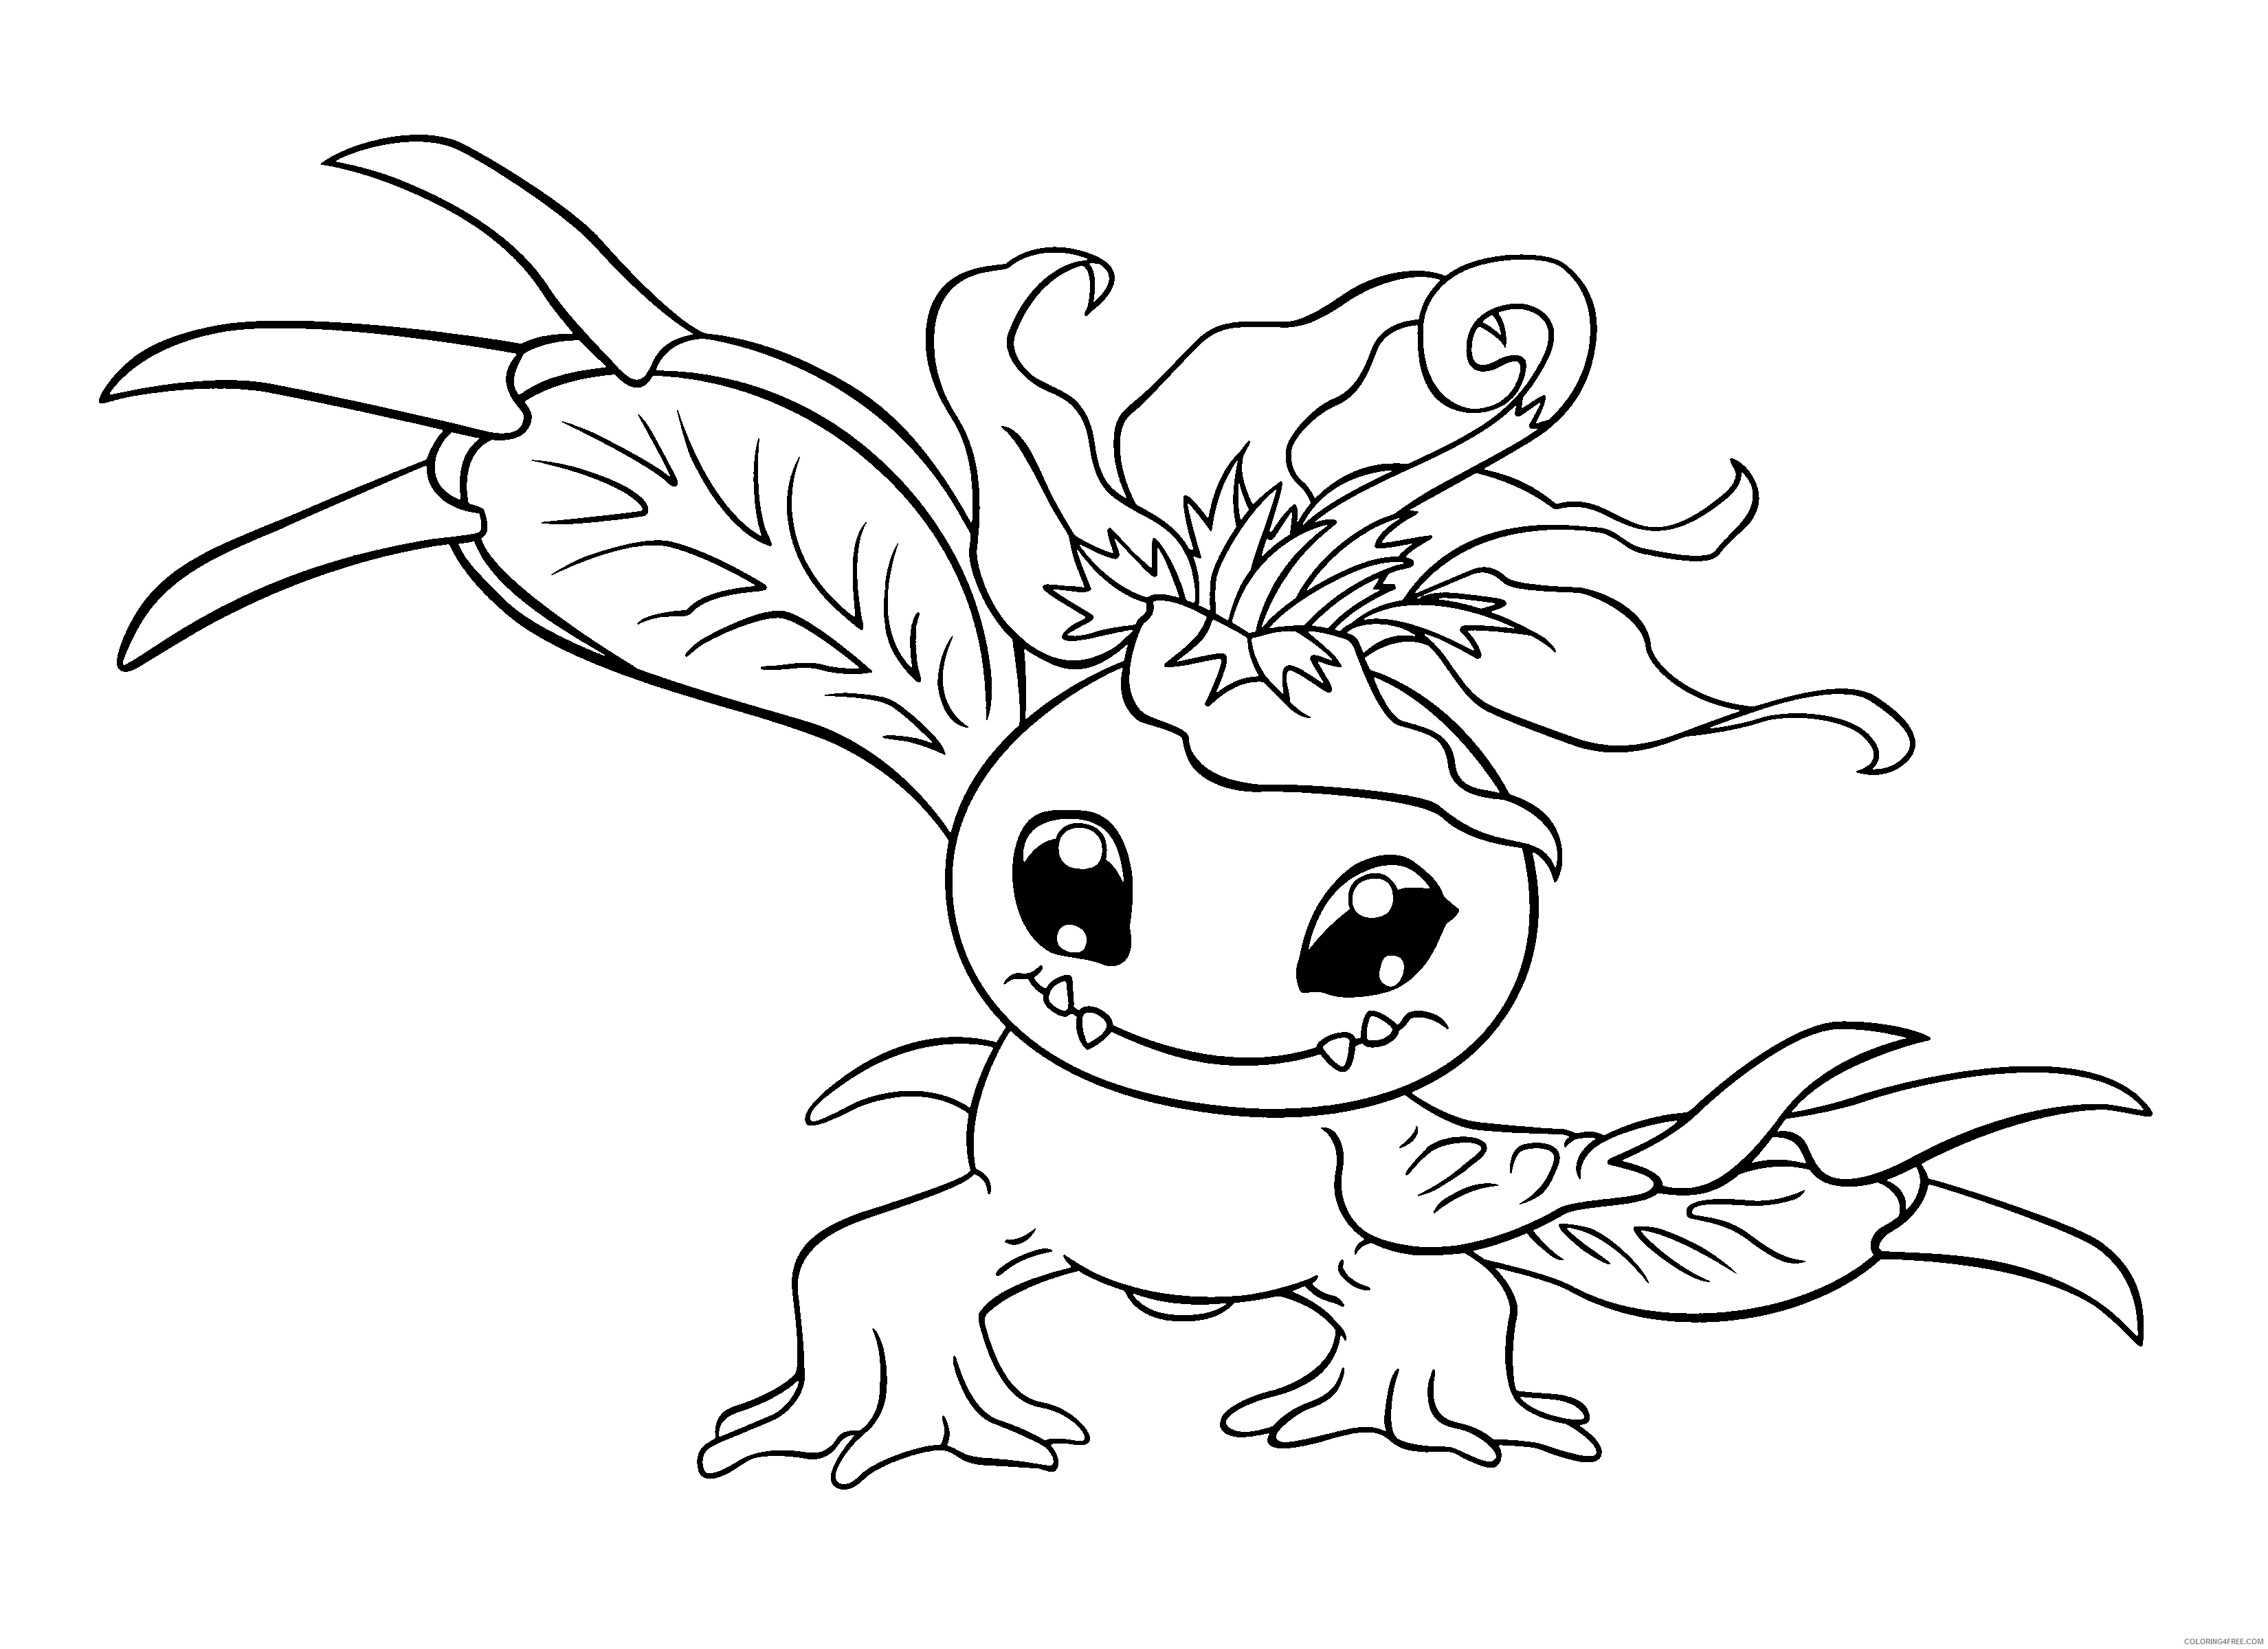 Digimon Printable Coloring Pages Anime digimon 261 2021 0342 Coloring4free